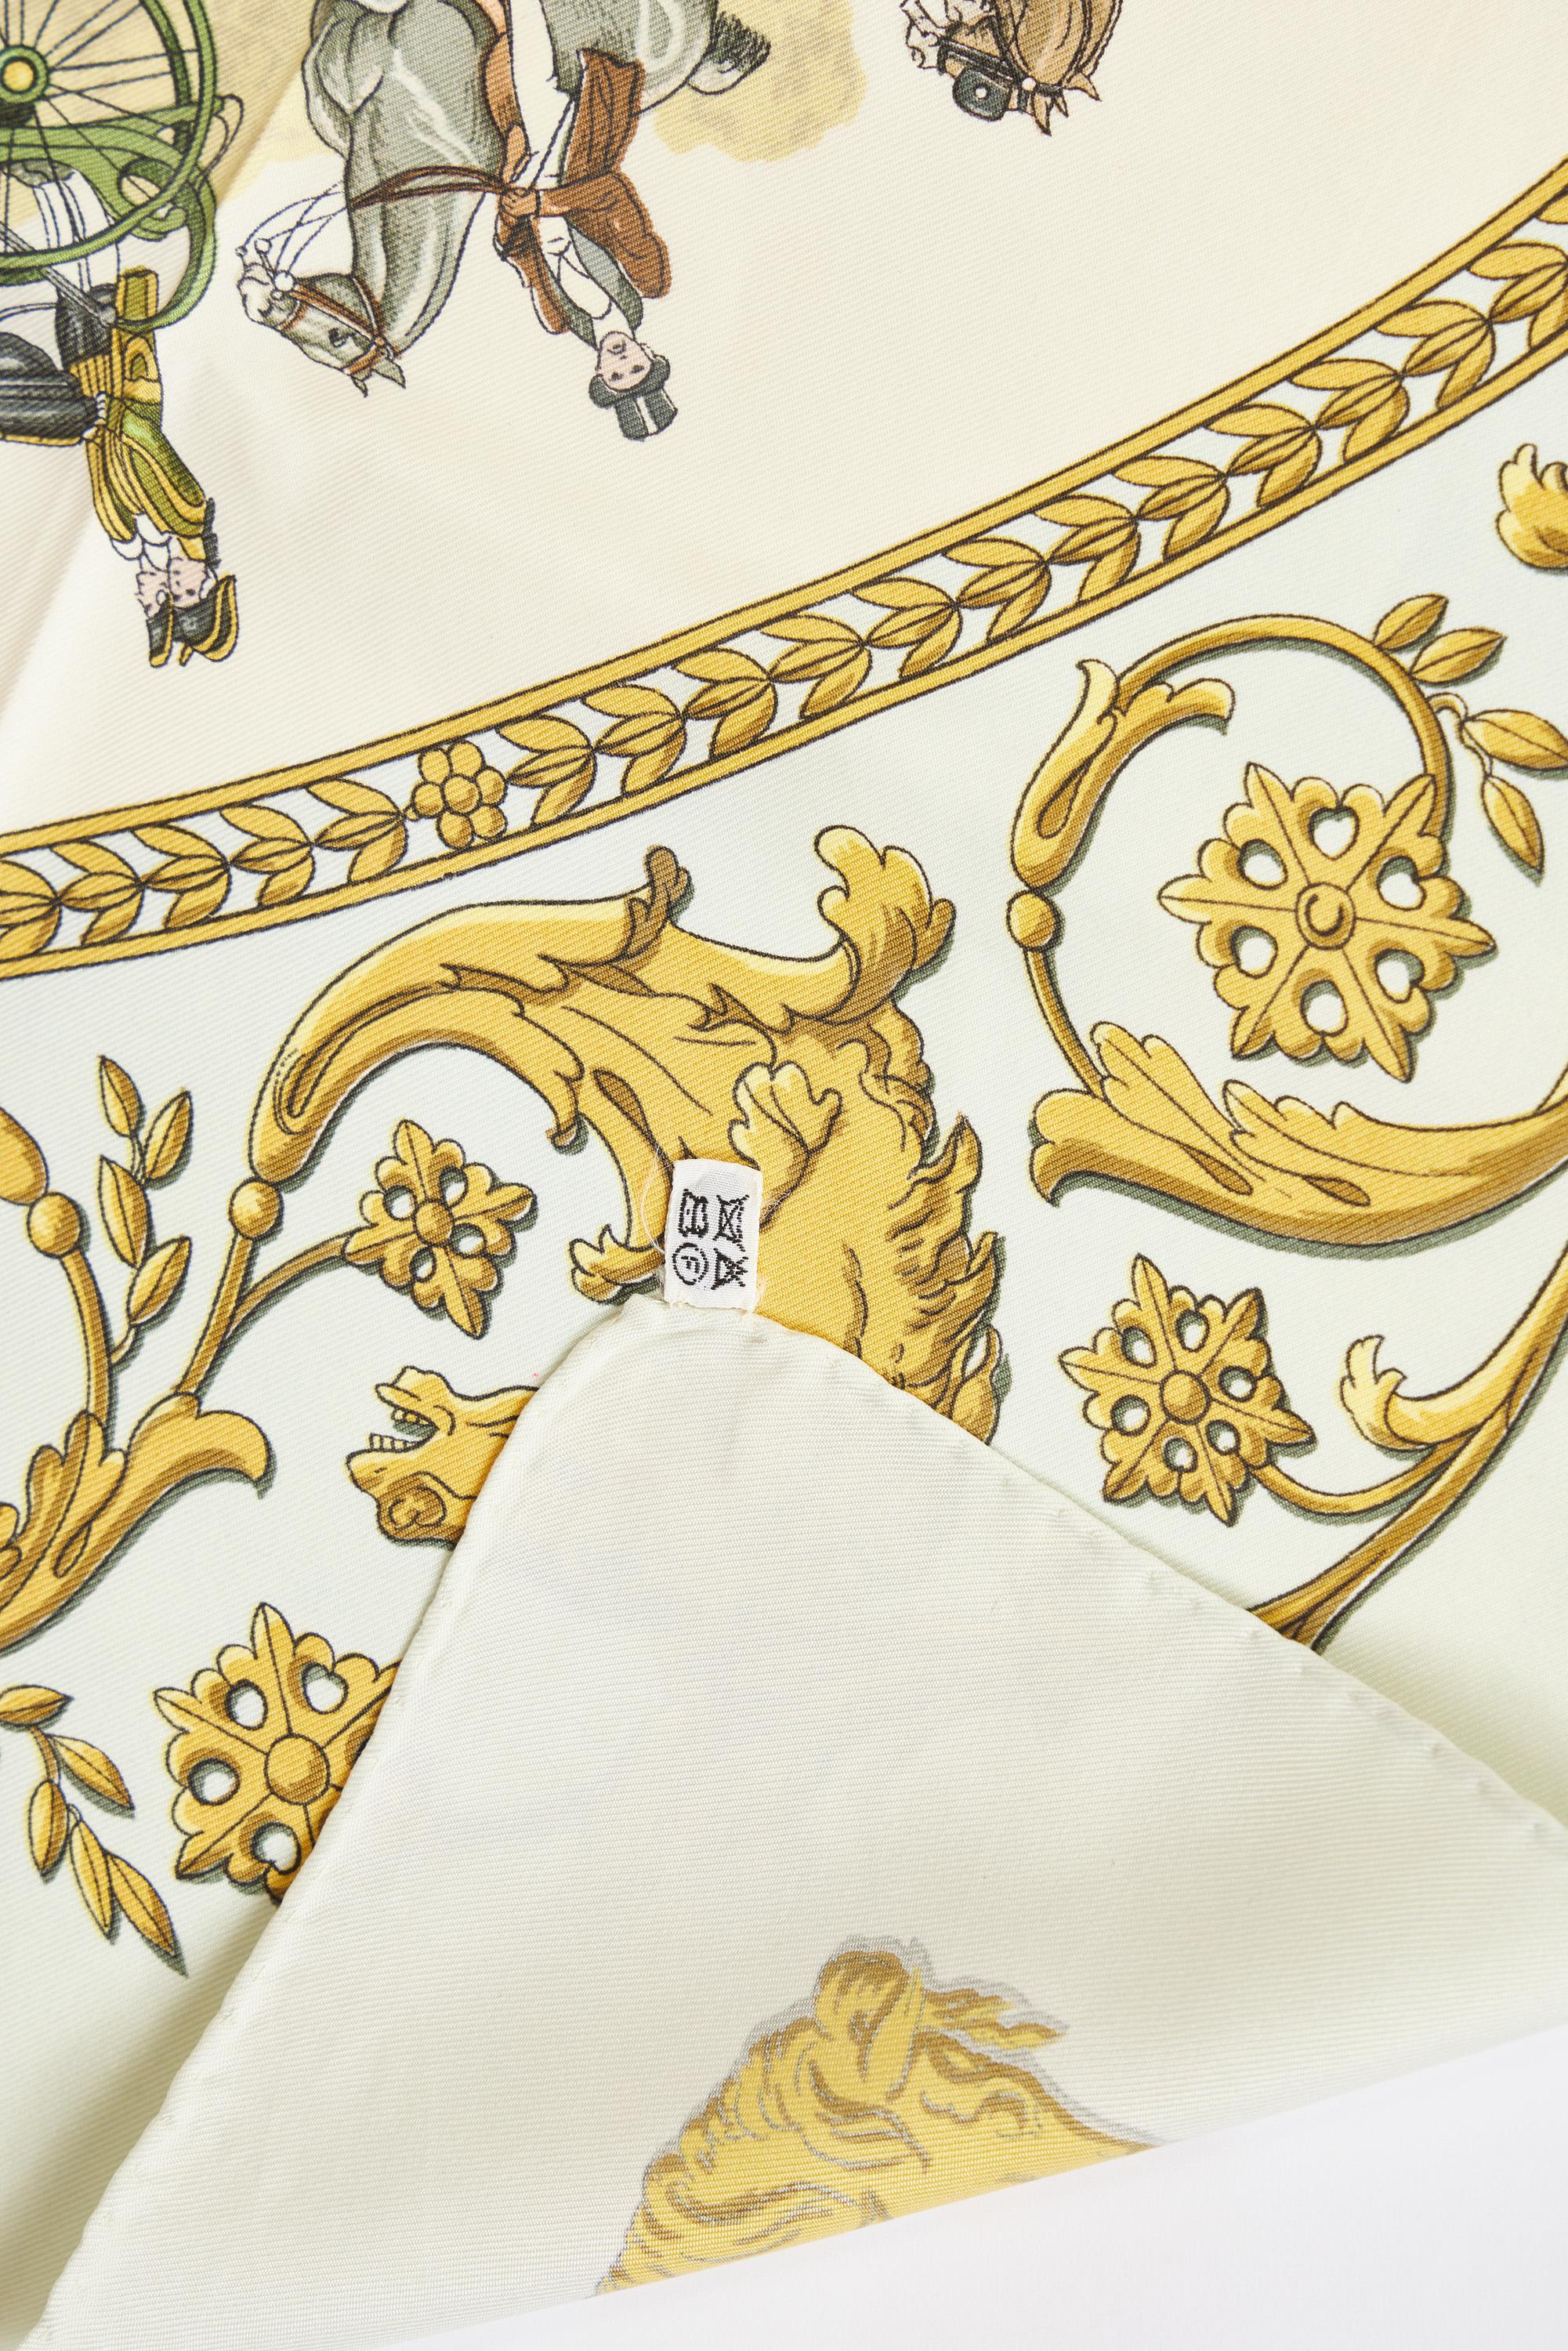 Hermès silk twill La Promenade de Longchamps scarf by coveted artist Ledoux. Original issue date 1965. Depicts carriage horses and ornate gold scrolling. Hand-rolled edges. Does not include box. Minor wear.
